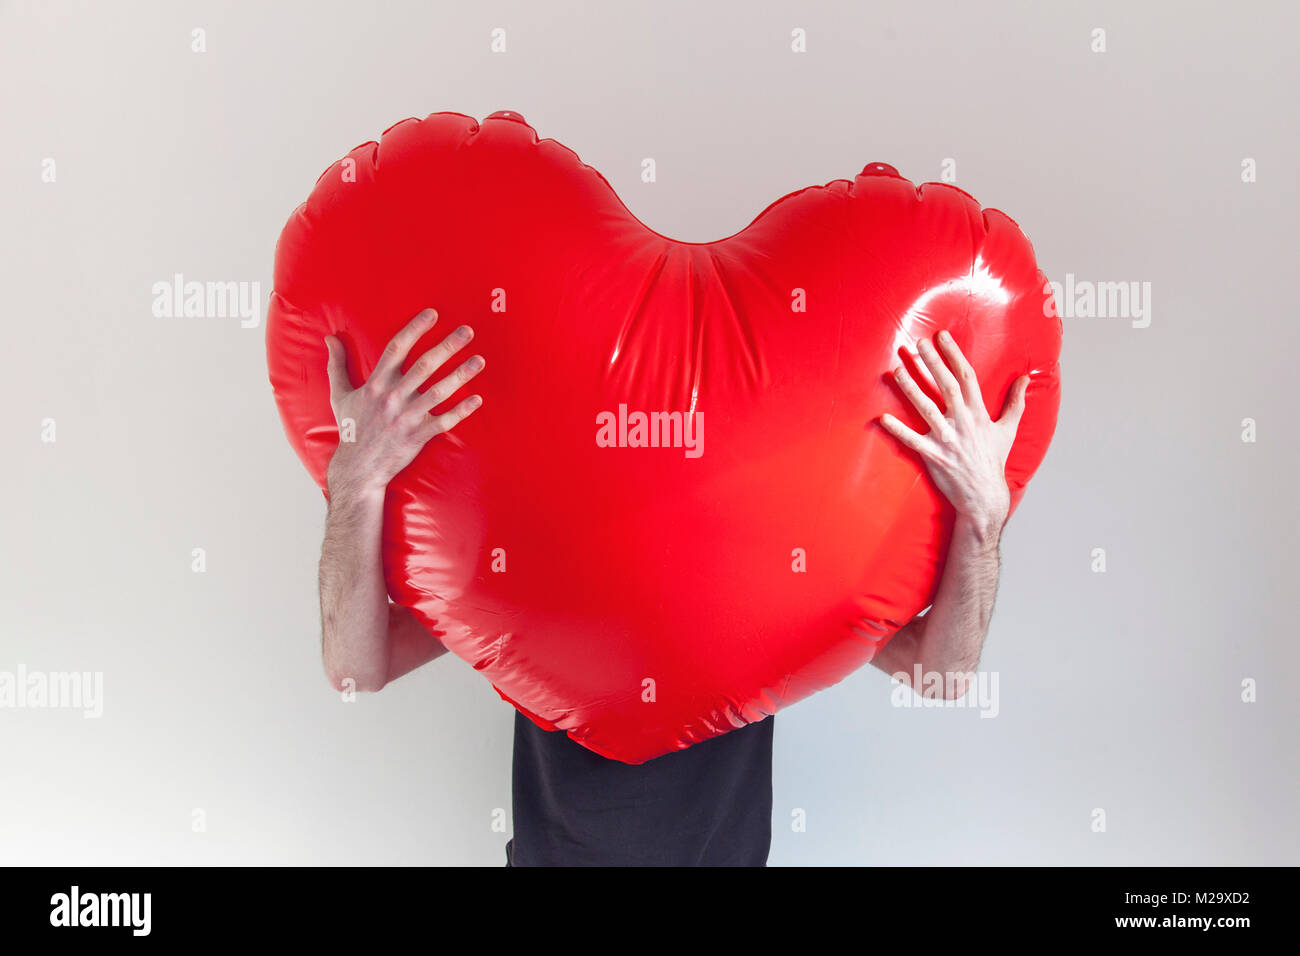 A person hugs a large red inflatable love heart. Health and love concept Stock Photo